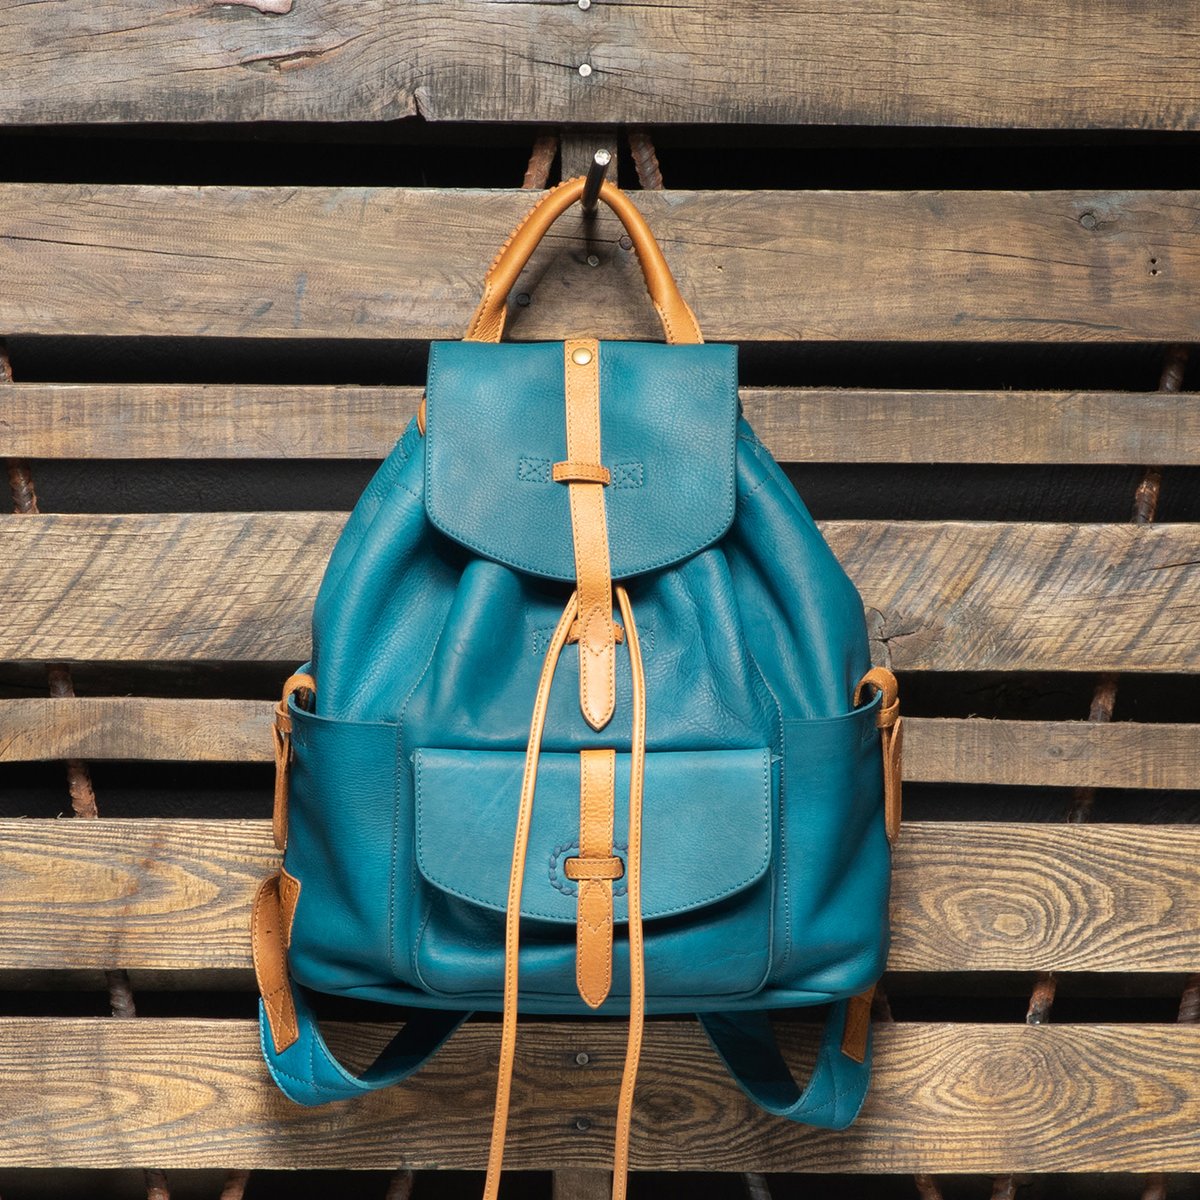 The Rainier backpack. Now available in a variety of dual-tone styles. bit.ly/WLG_Backpacks

#backpack  #backpacks #hiking #adventure #travelbag #leatherbag #schoolbag #rucksack #daypack #leatherbackpack #leatherbag #giftideas #graduationgift #giftsforher